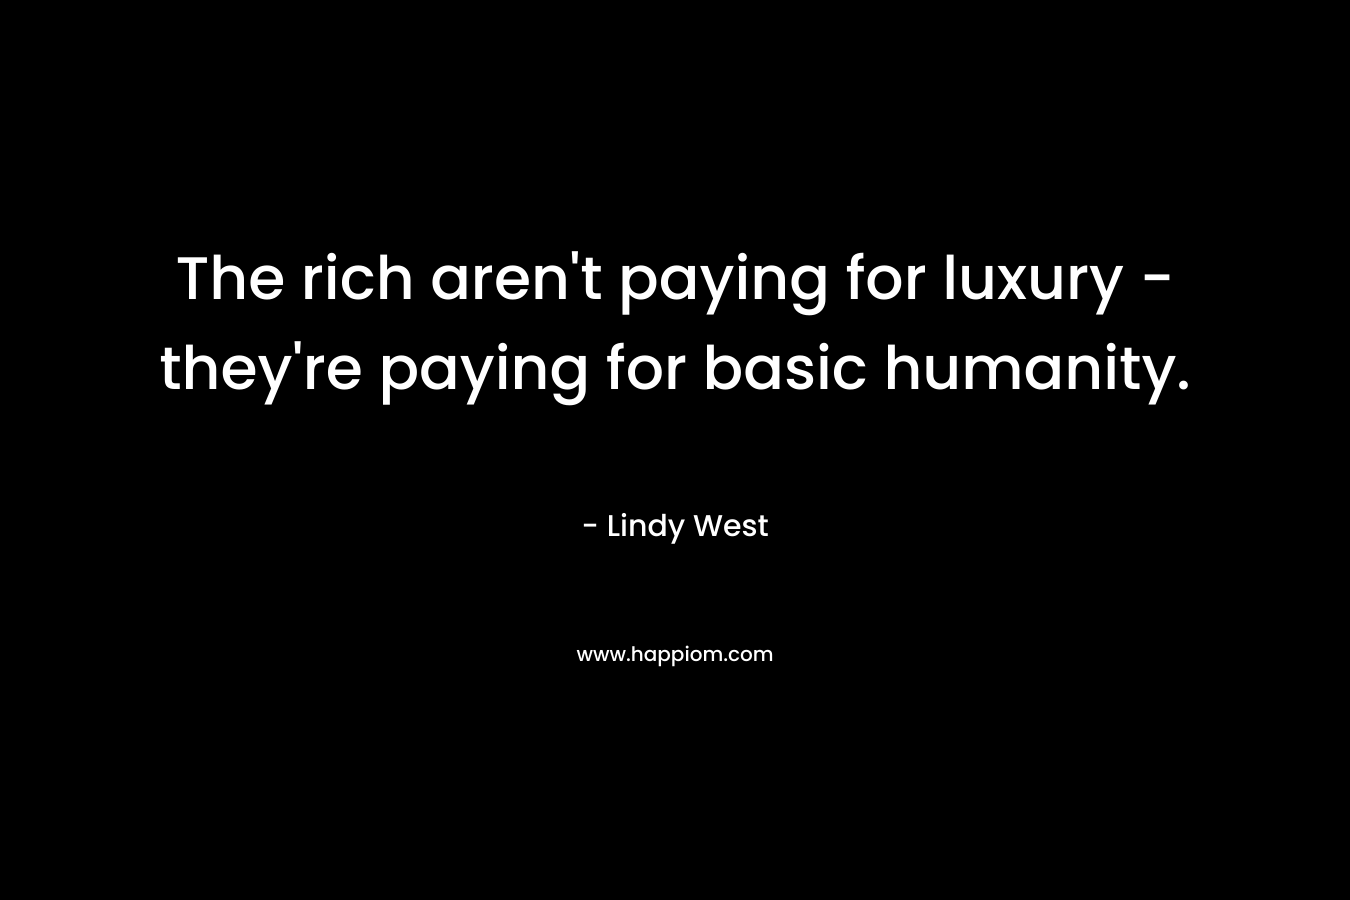 The rich aren't paying for luxury - they're paying for basic humanity.